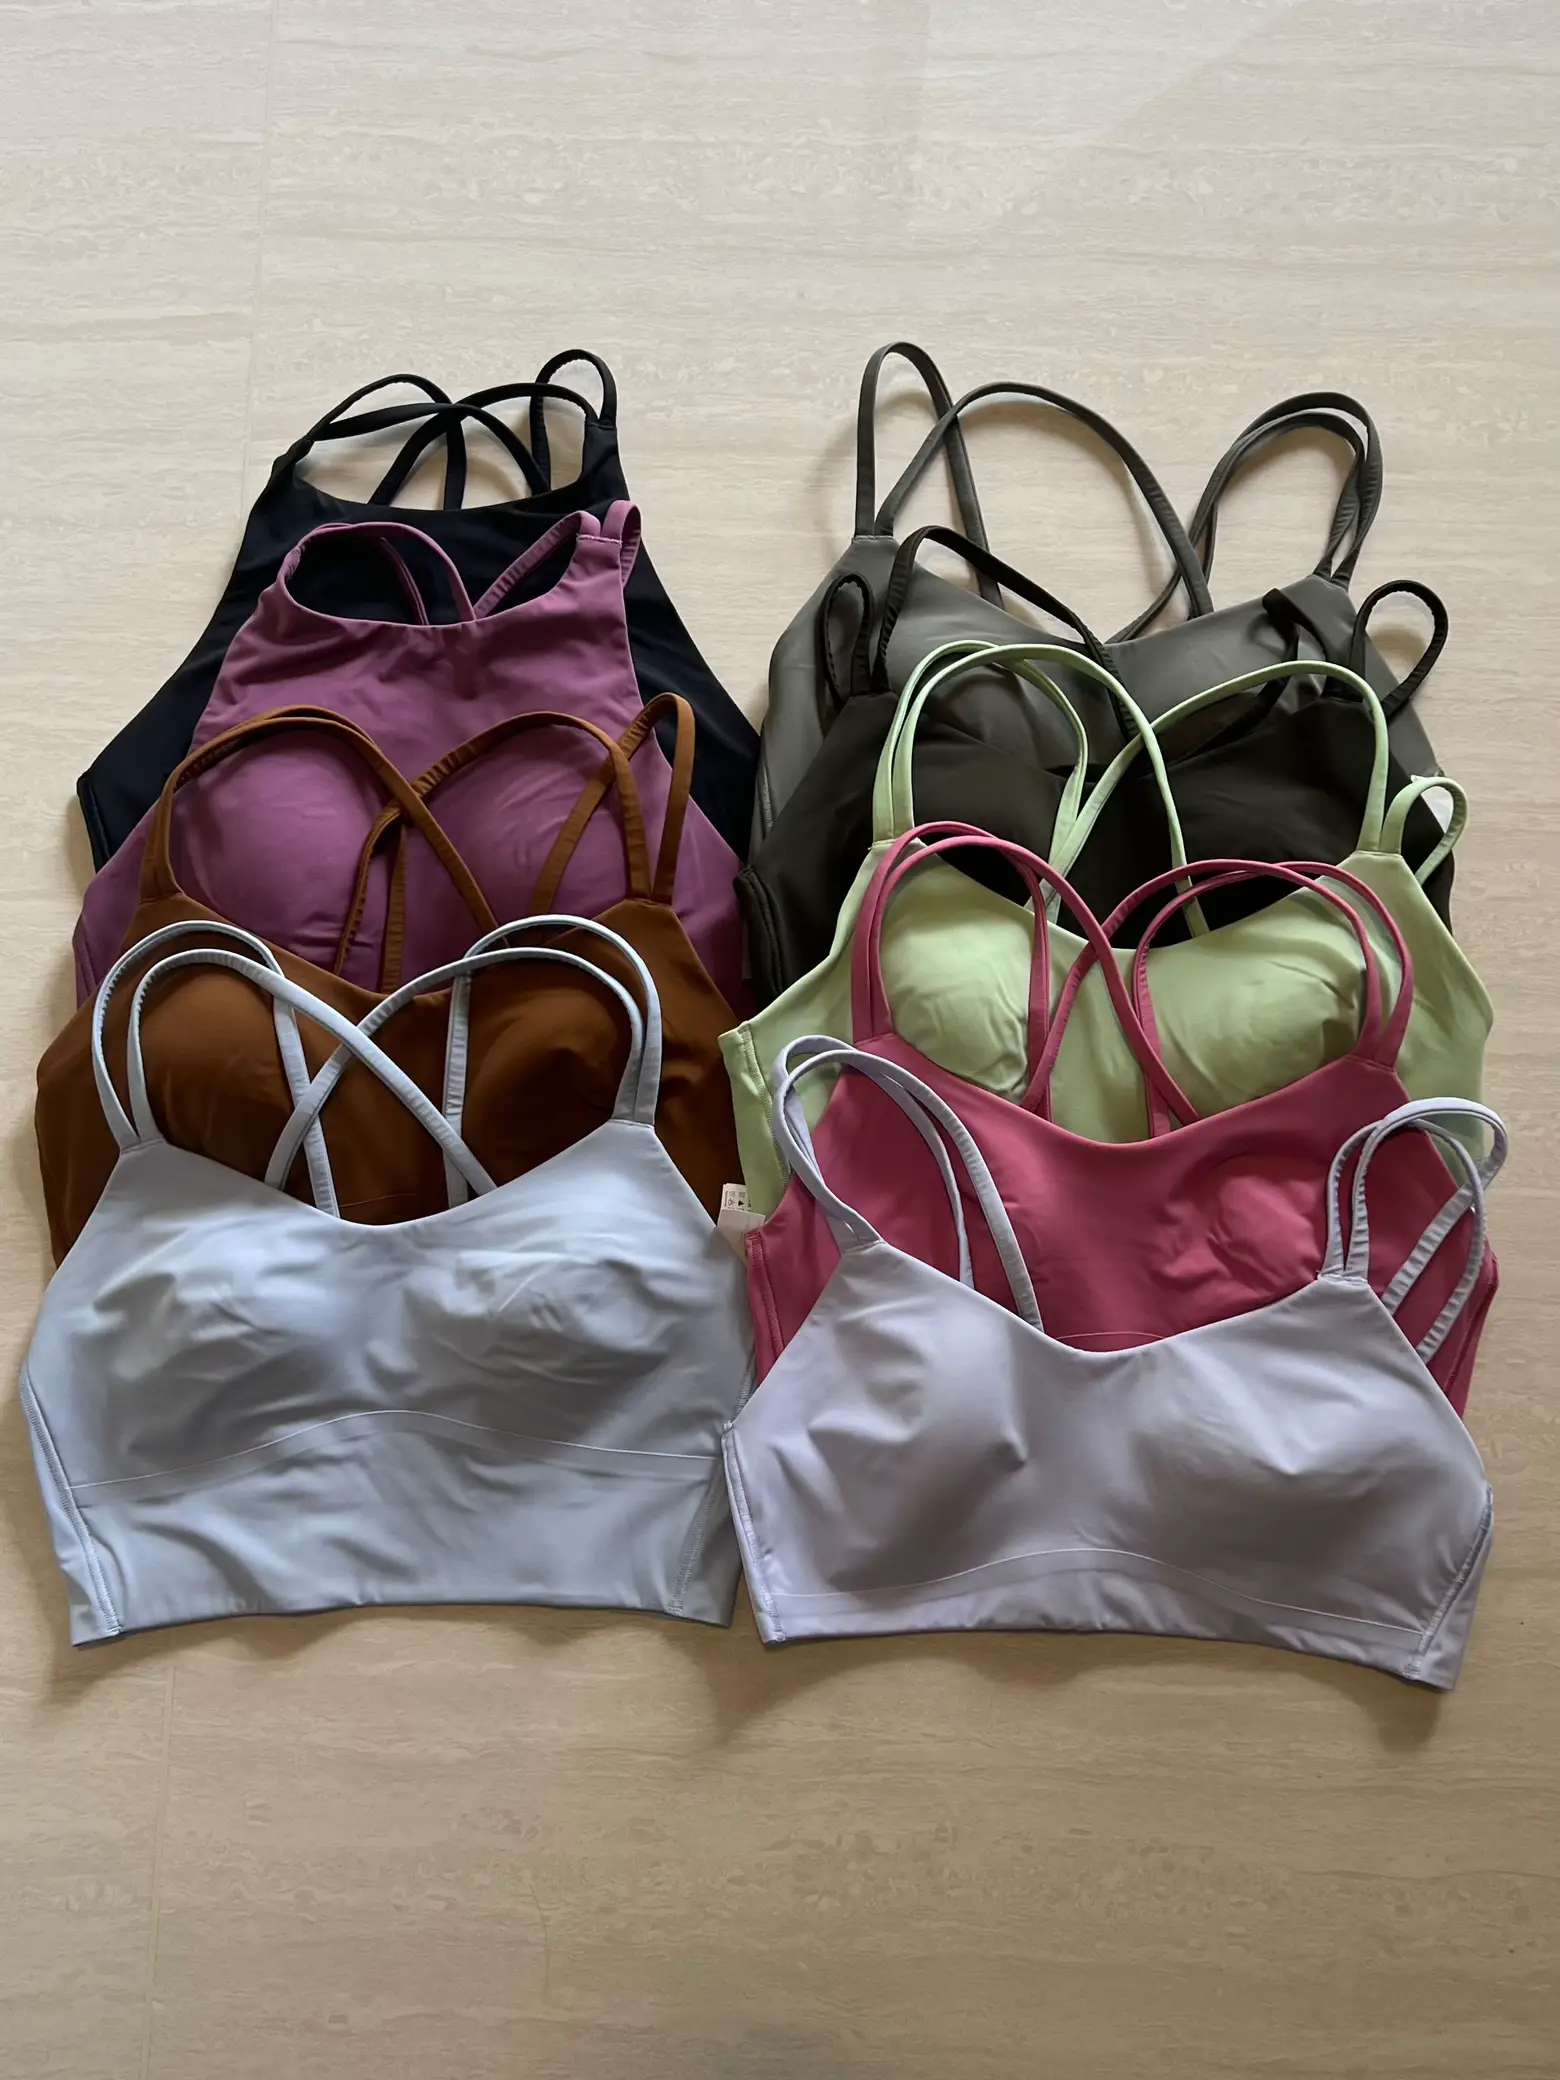 my lululemon like a cloud bra collection ☁️, Gallery posted by ✿ drew ✿